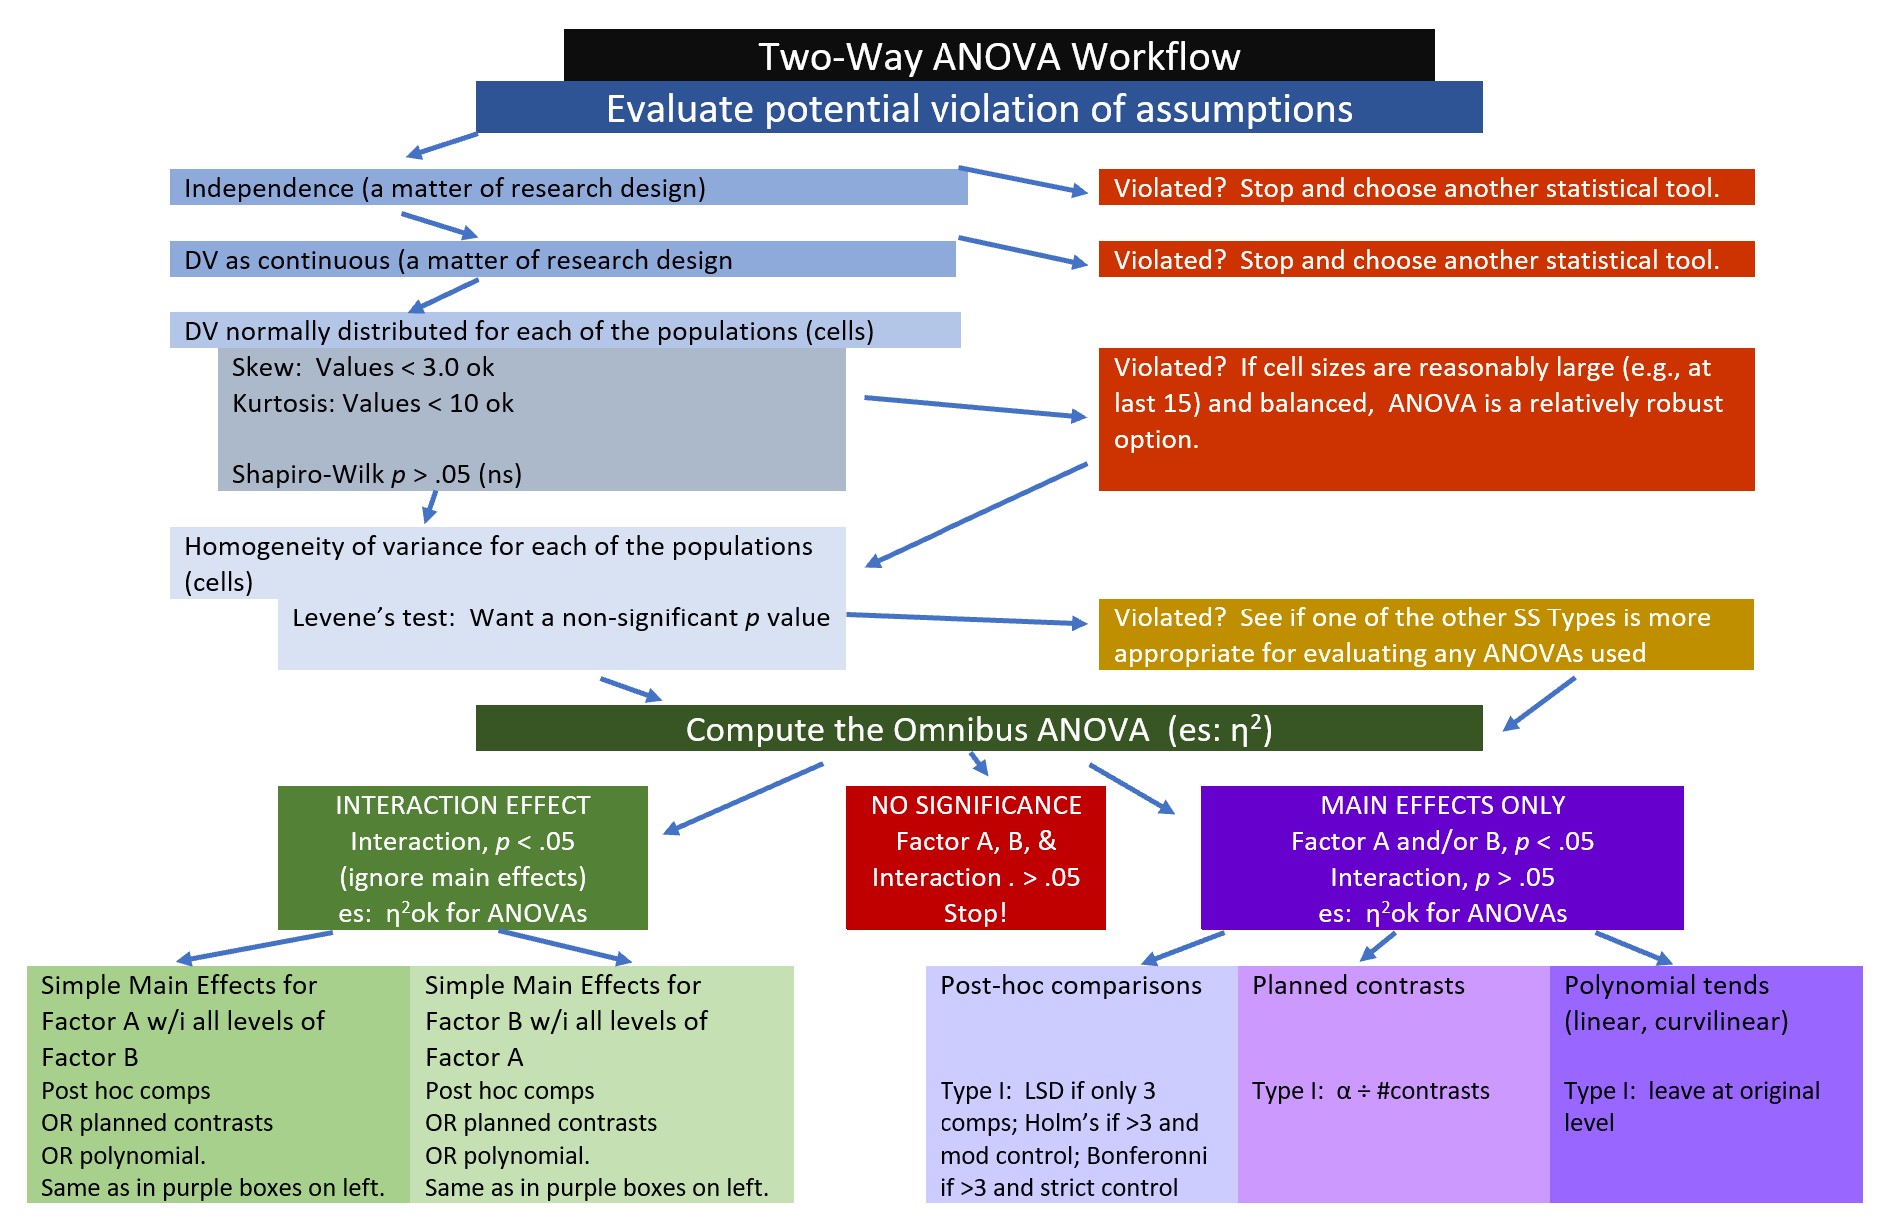 An image of a workflow for the two-way ANOVA